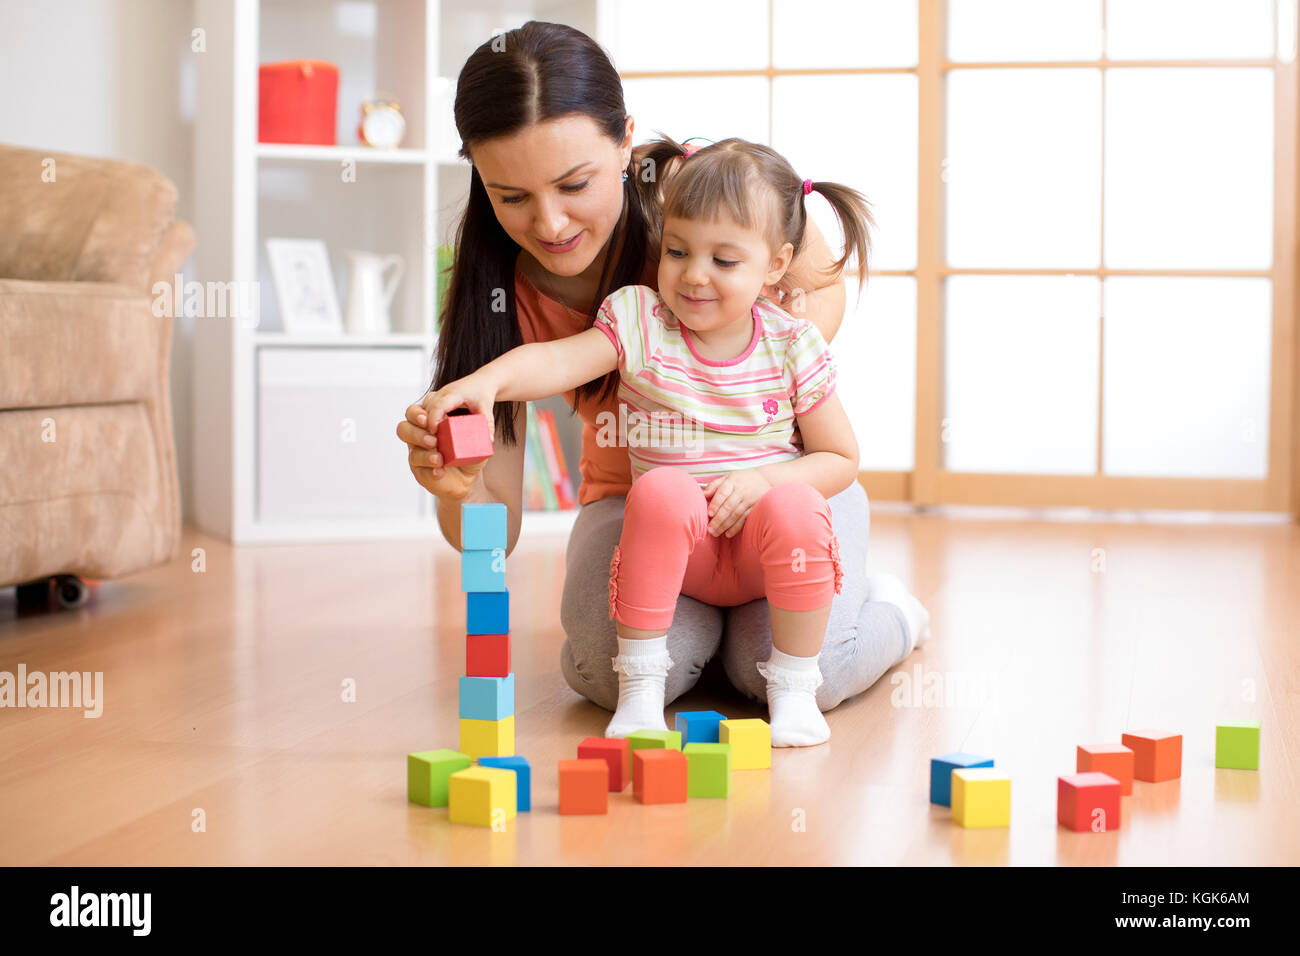 cute mother and child girl playing together Stock Photo